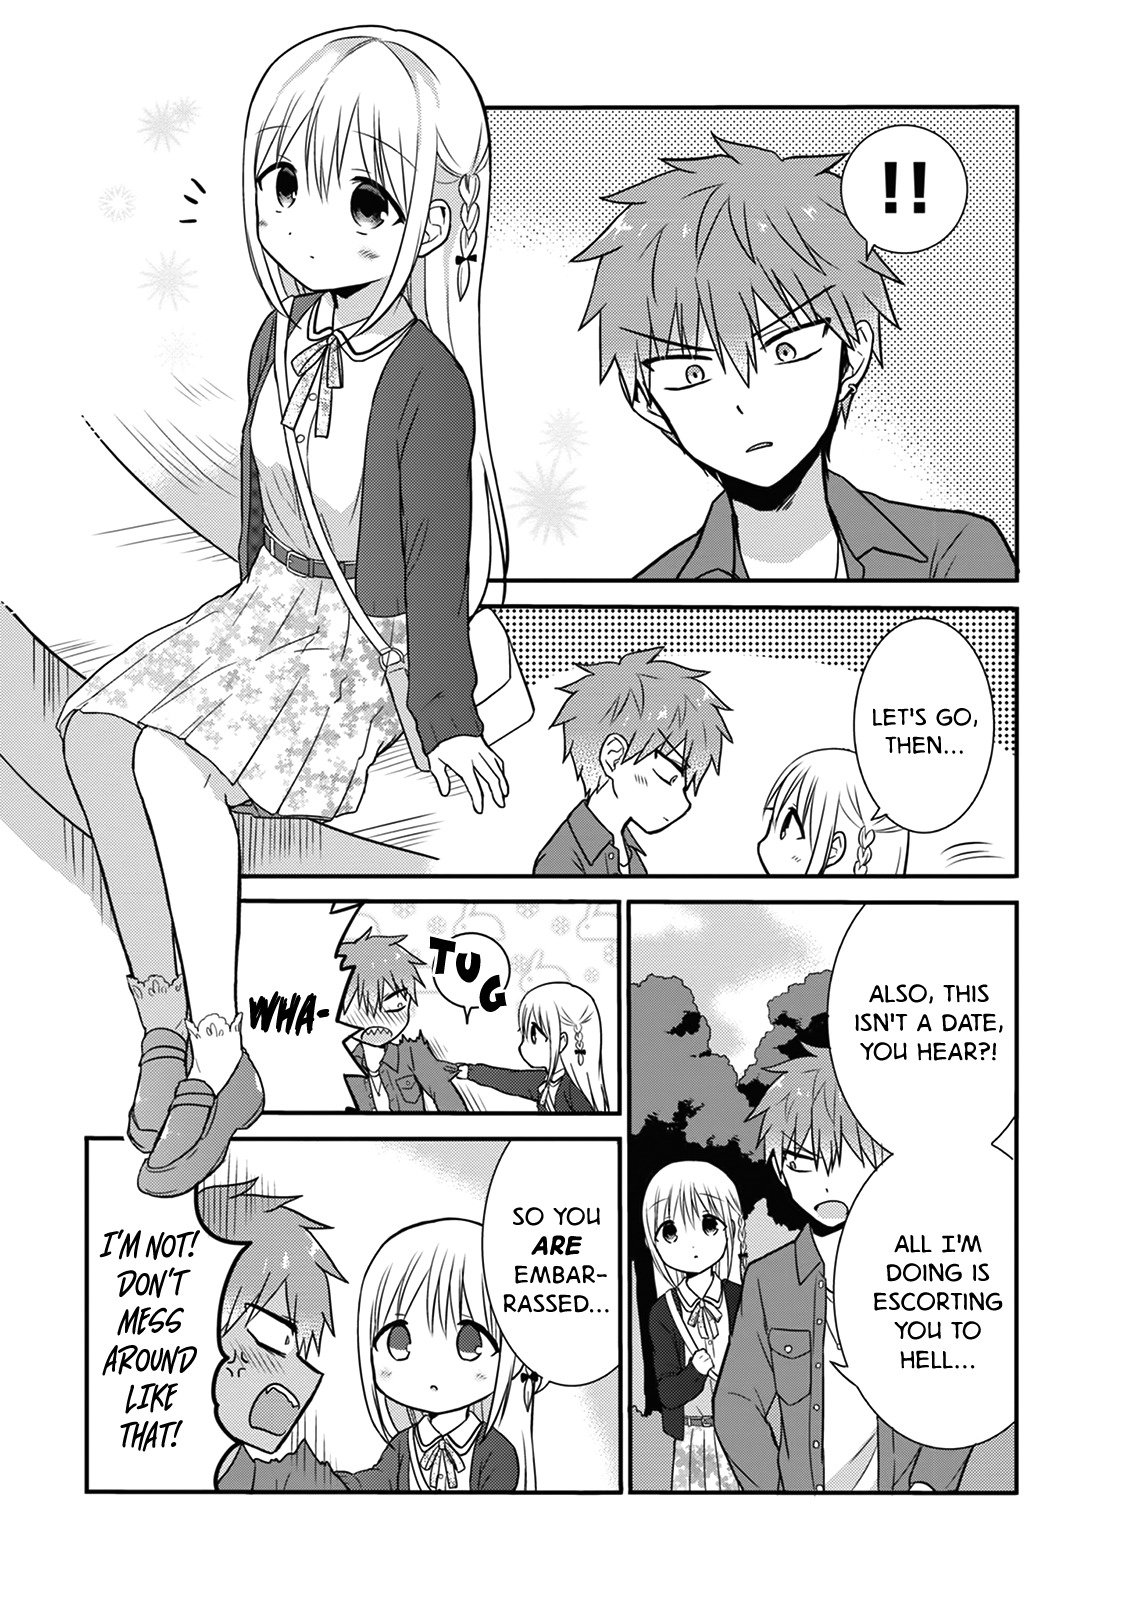 Expressionless Face Girl and Emotional Face Boy vol.1 ch.12